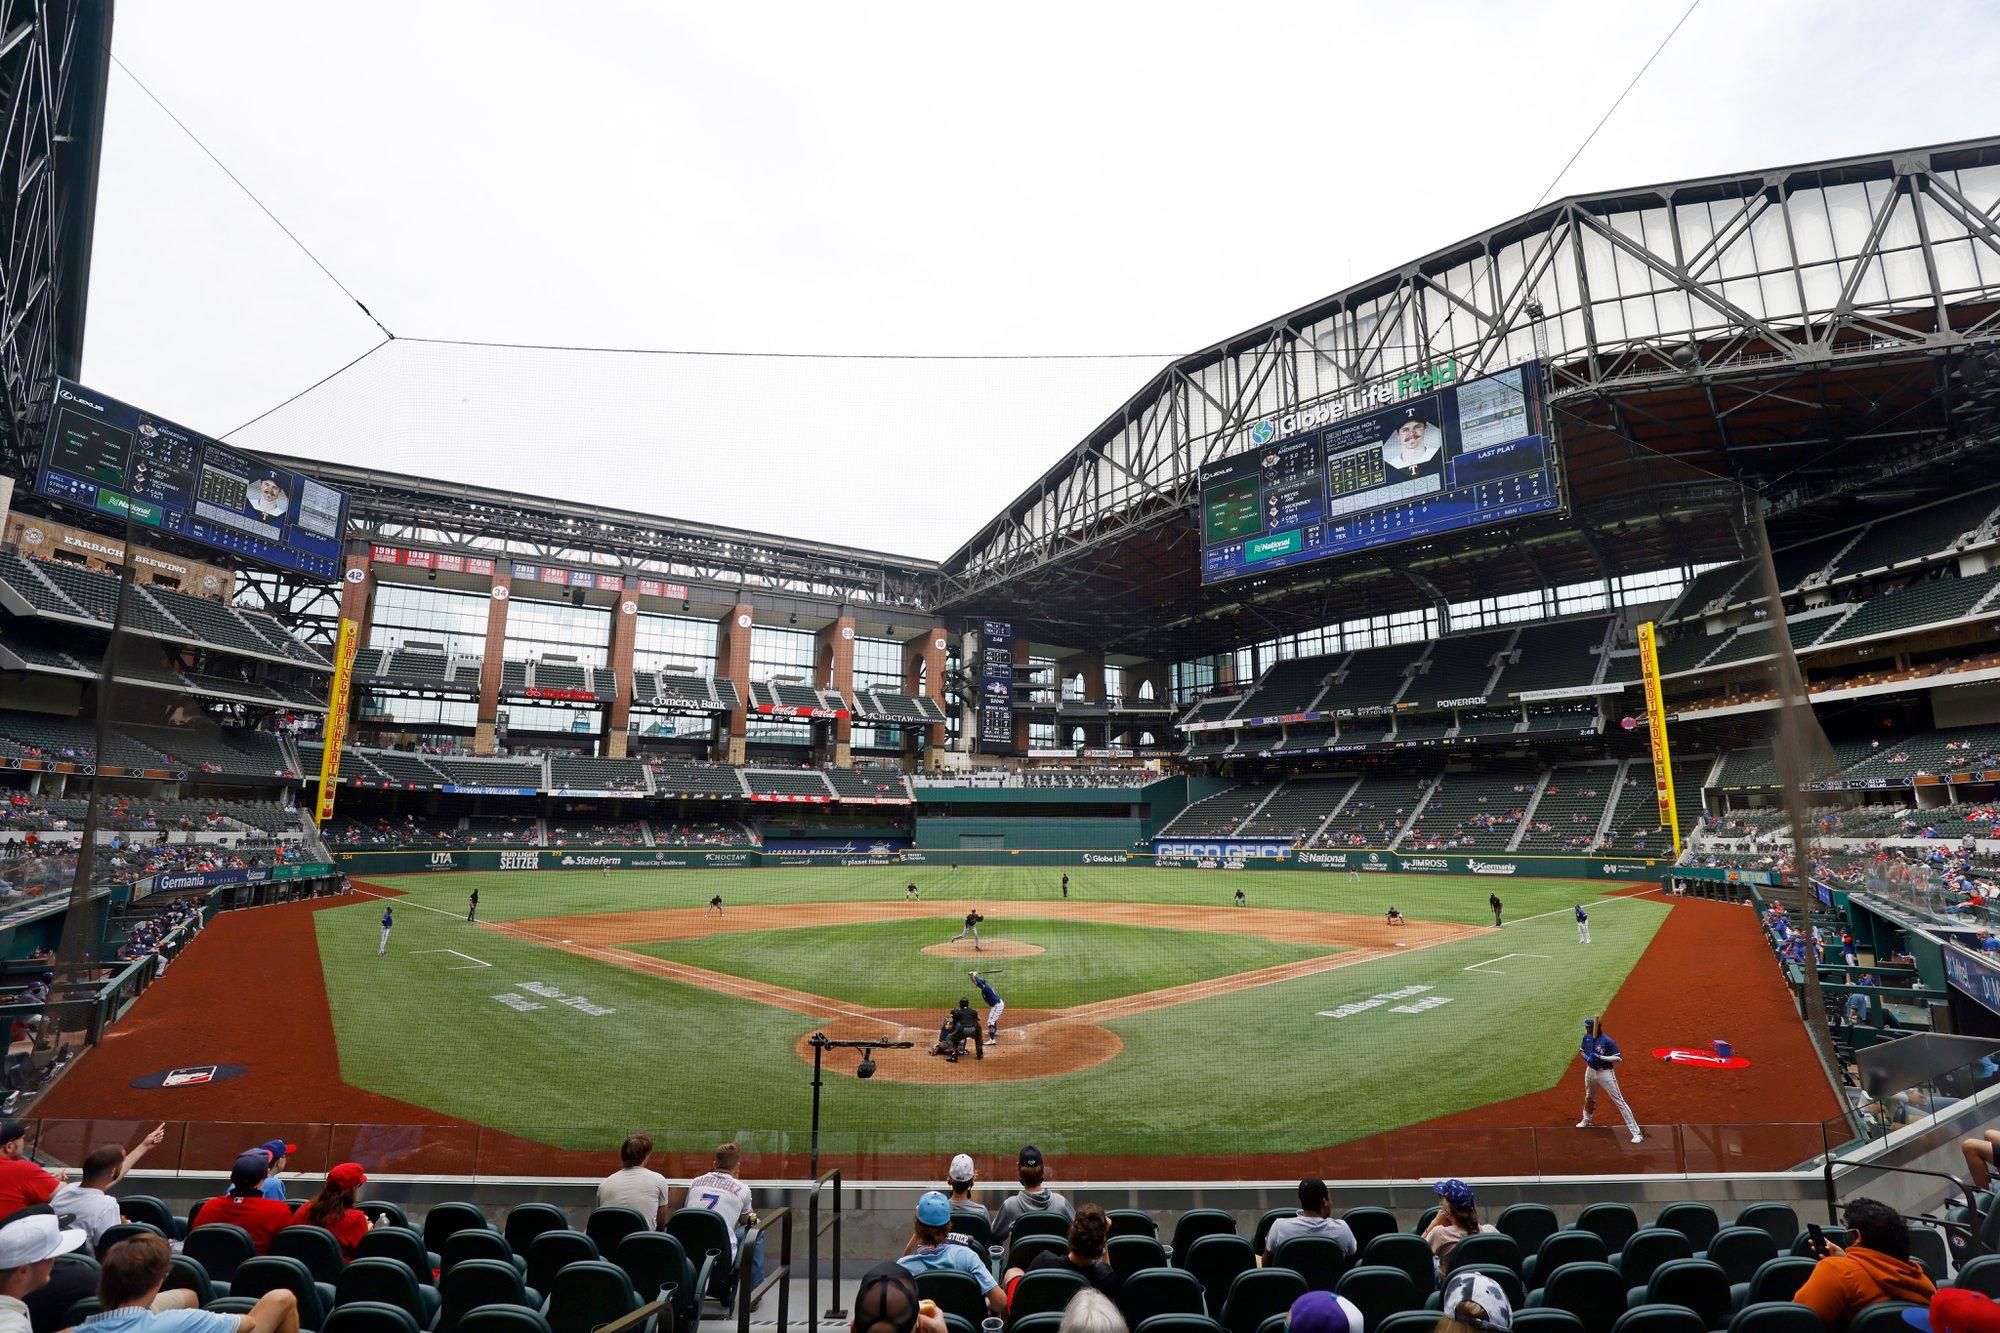 The Texas Rangers and the Milwaukee Brewers play a preseason baseball game at Globe Life Field, Tuesday, March 30, 2021, in Arlington, Texas. (AP Photo/Michael Ainsworth)